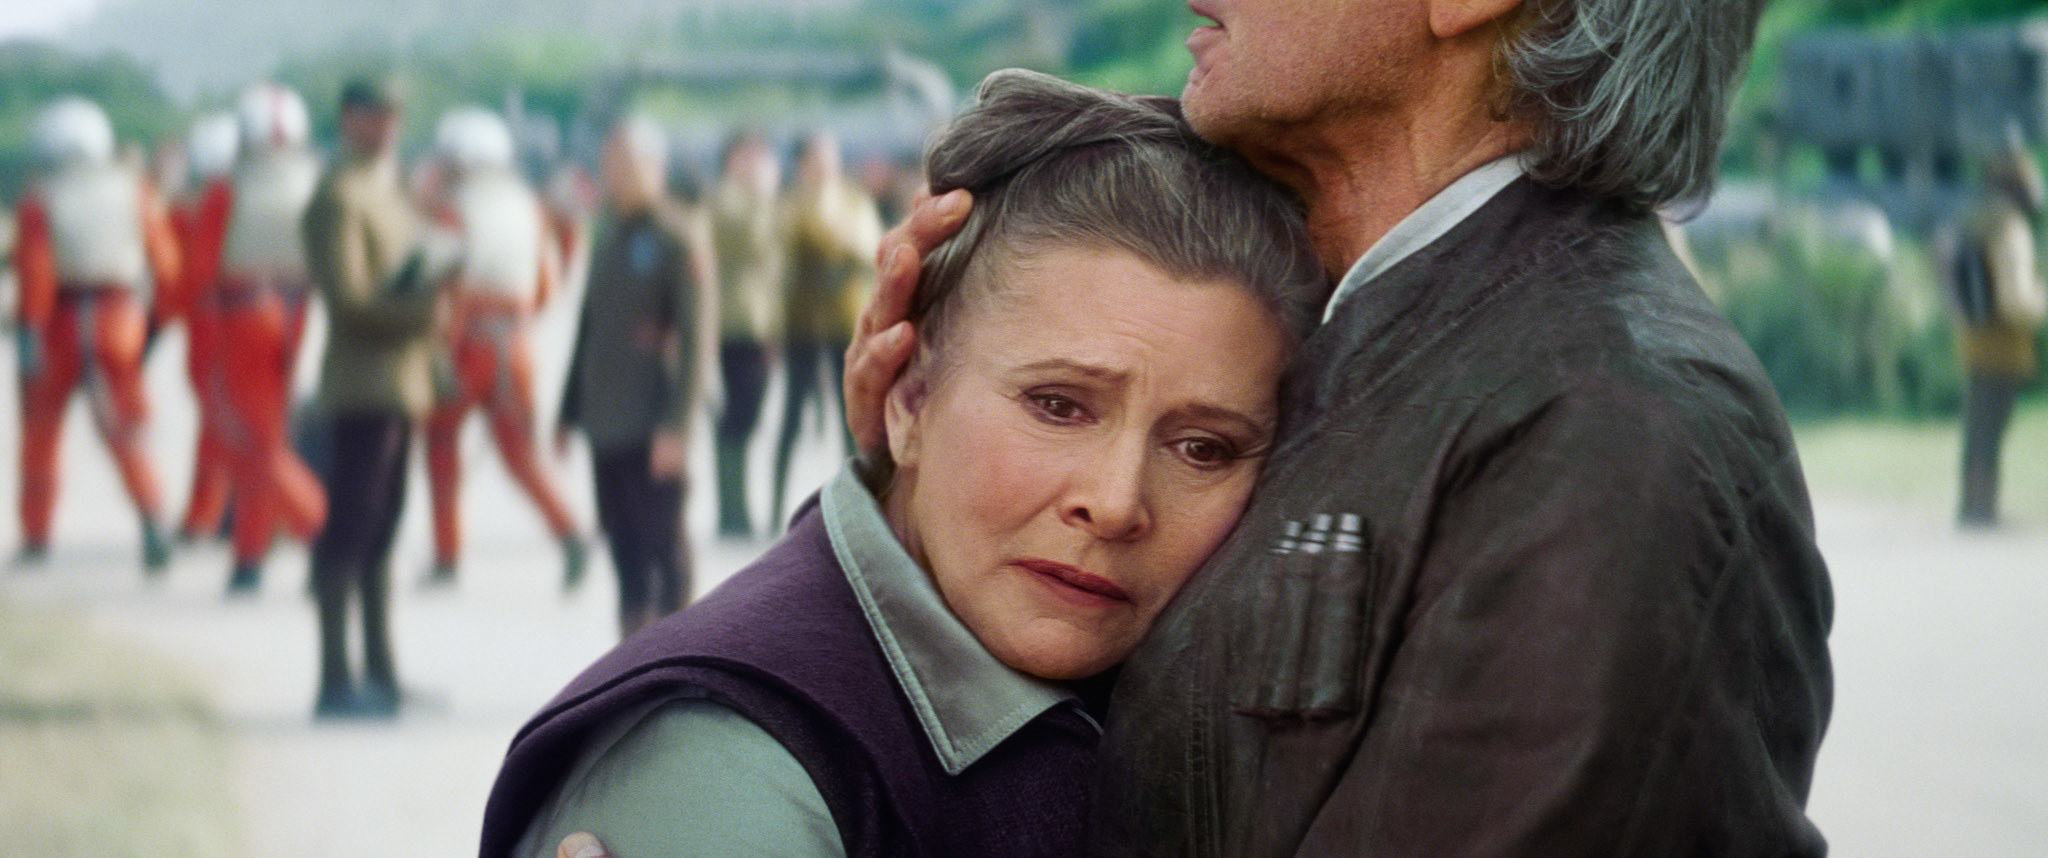 Carrie Fisher as Leia hugging Harrison Ford as Han Solo